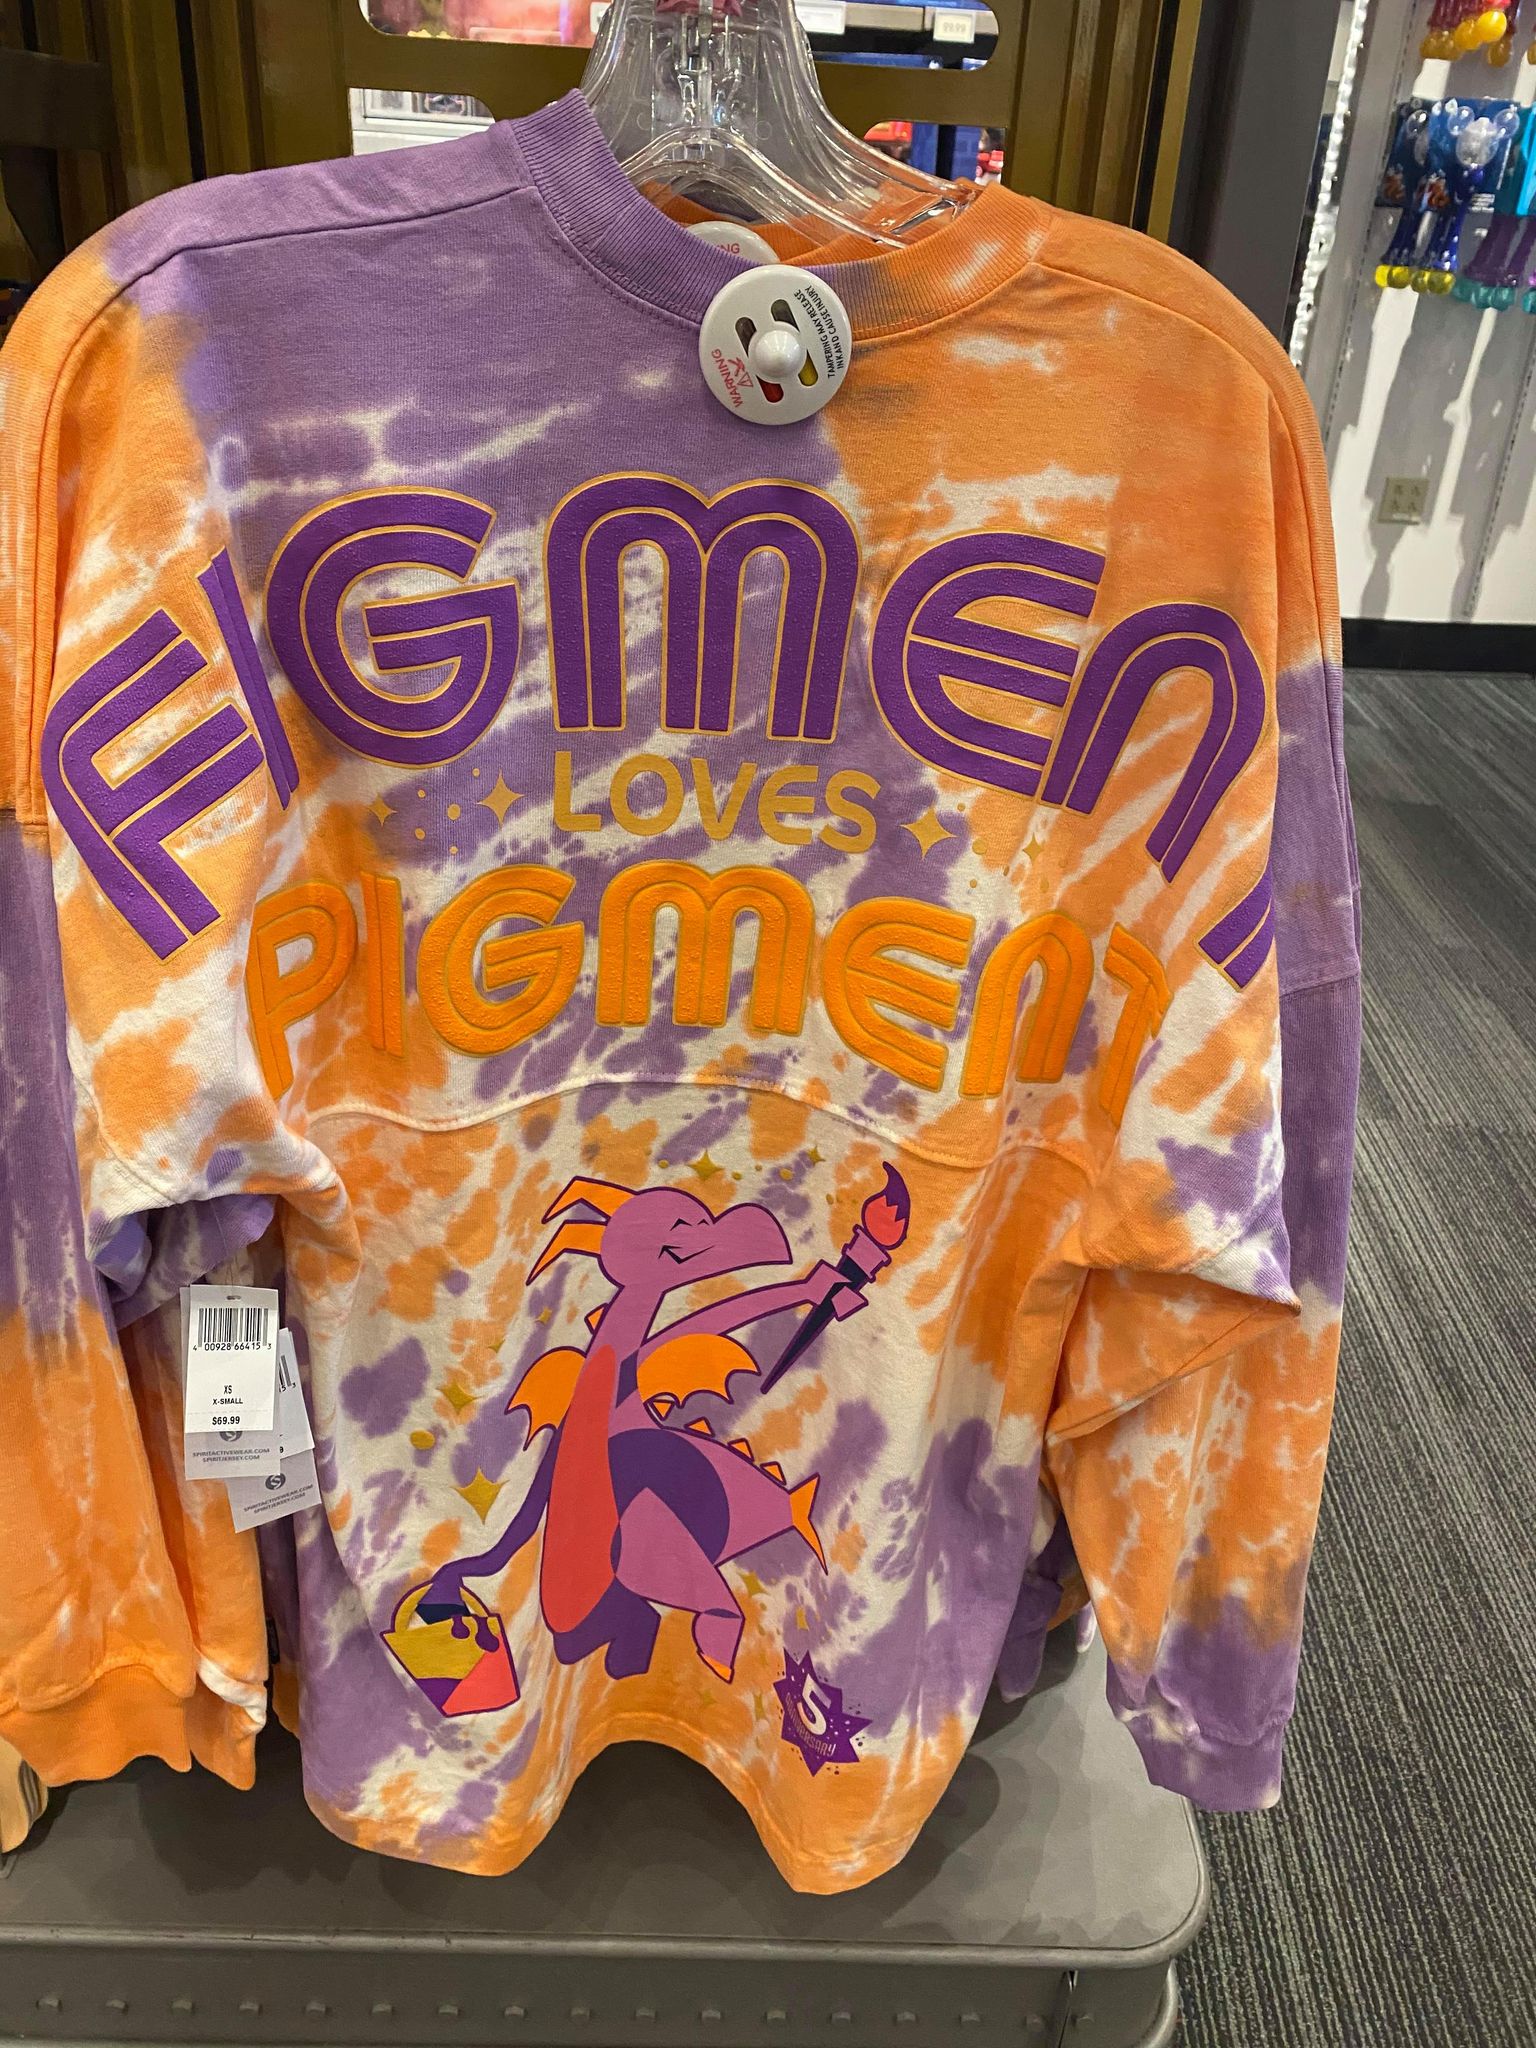 Figment Spirit Jersey has arrived at Festival of the Arts 2021